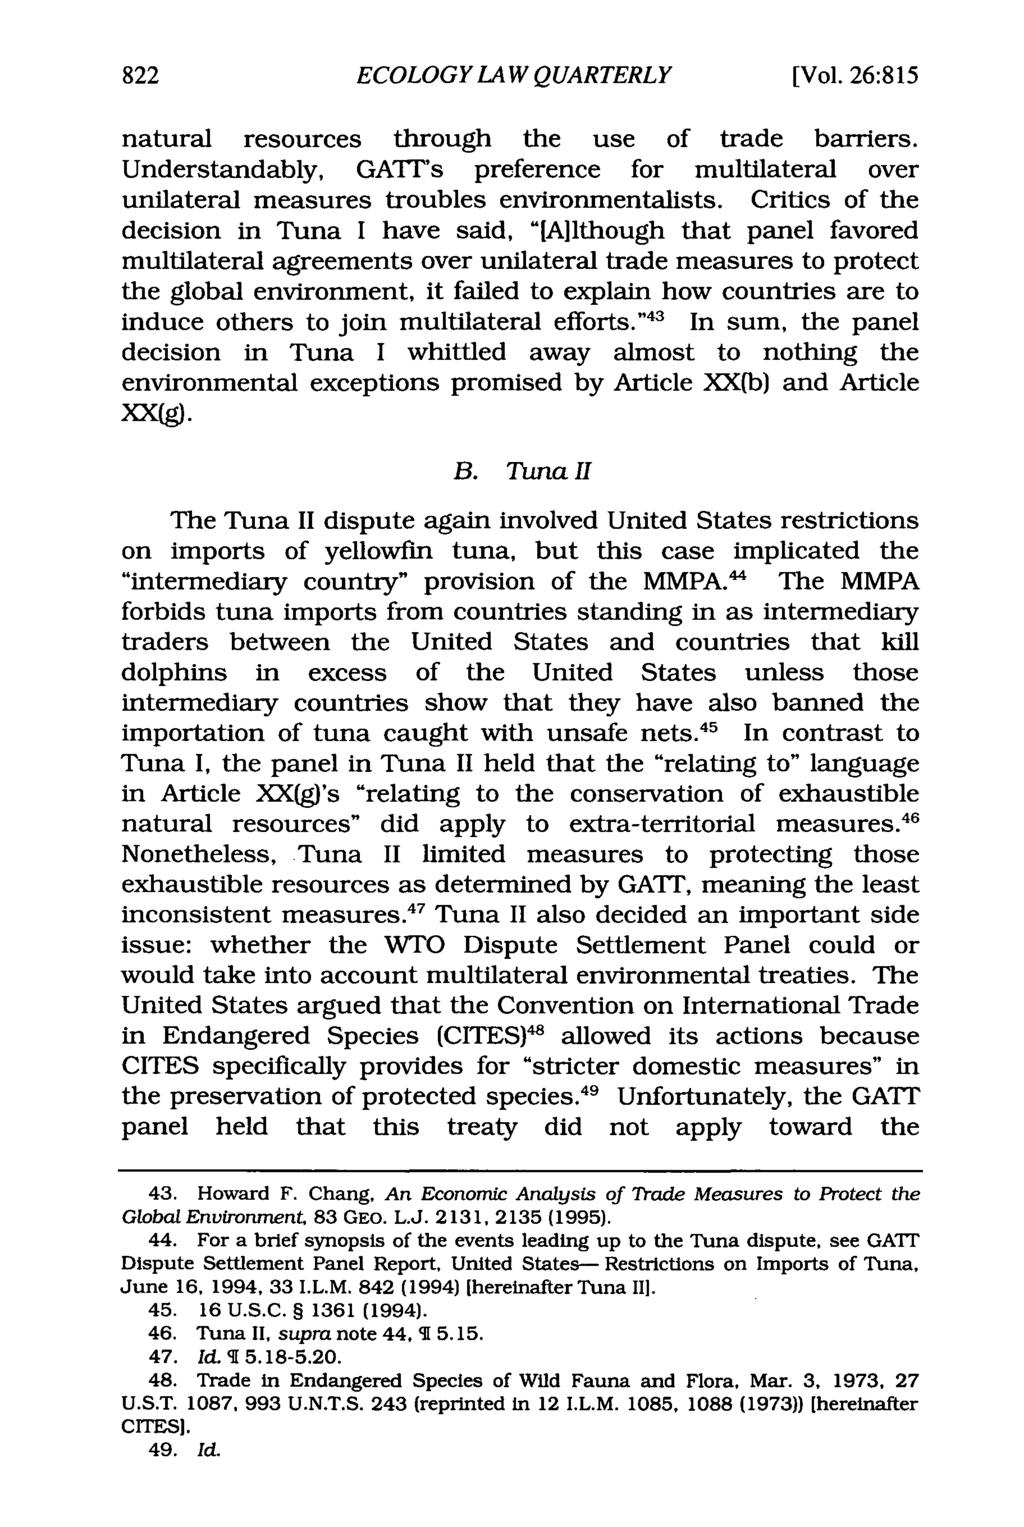 ECOLOGY LAW QUARTERLY (Vol. 26:815 natural resources through the use of trade barriers. Understandably, GATr's preference for multilateral over unilateral measures troubles environmentalists.